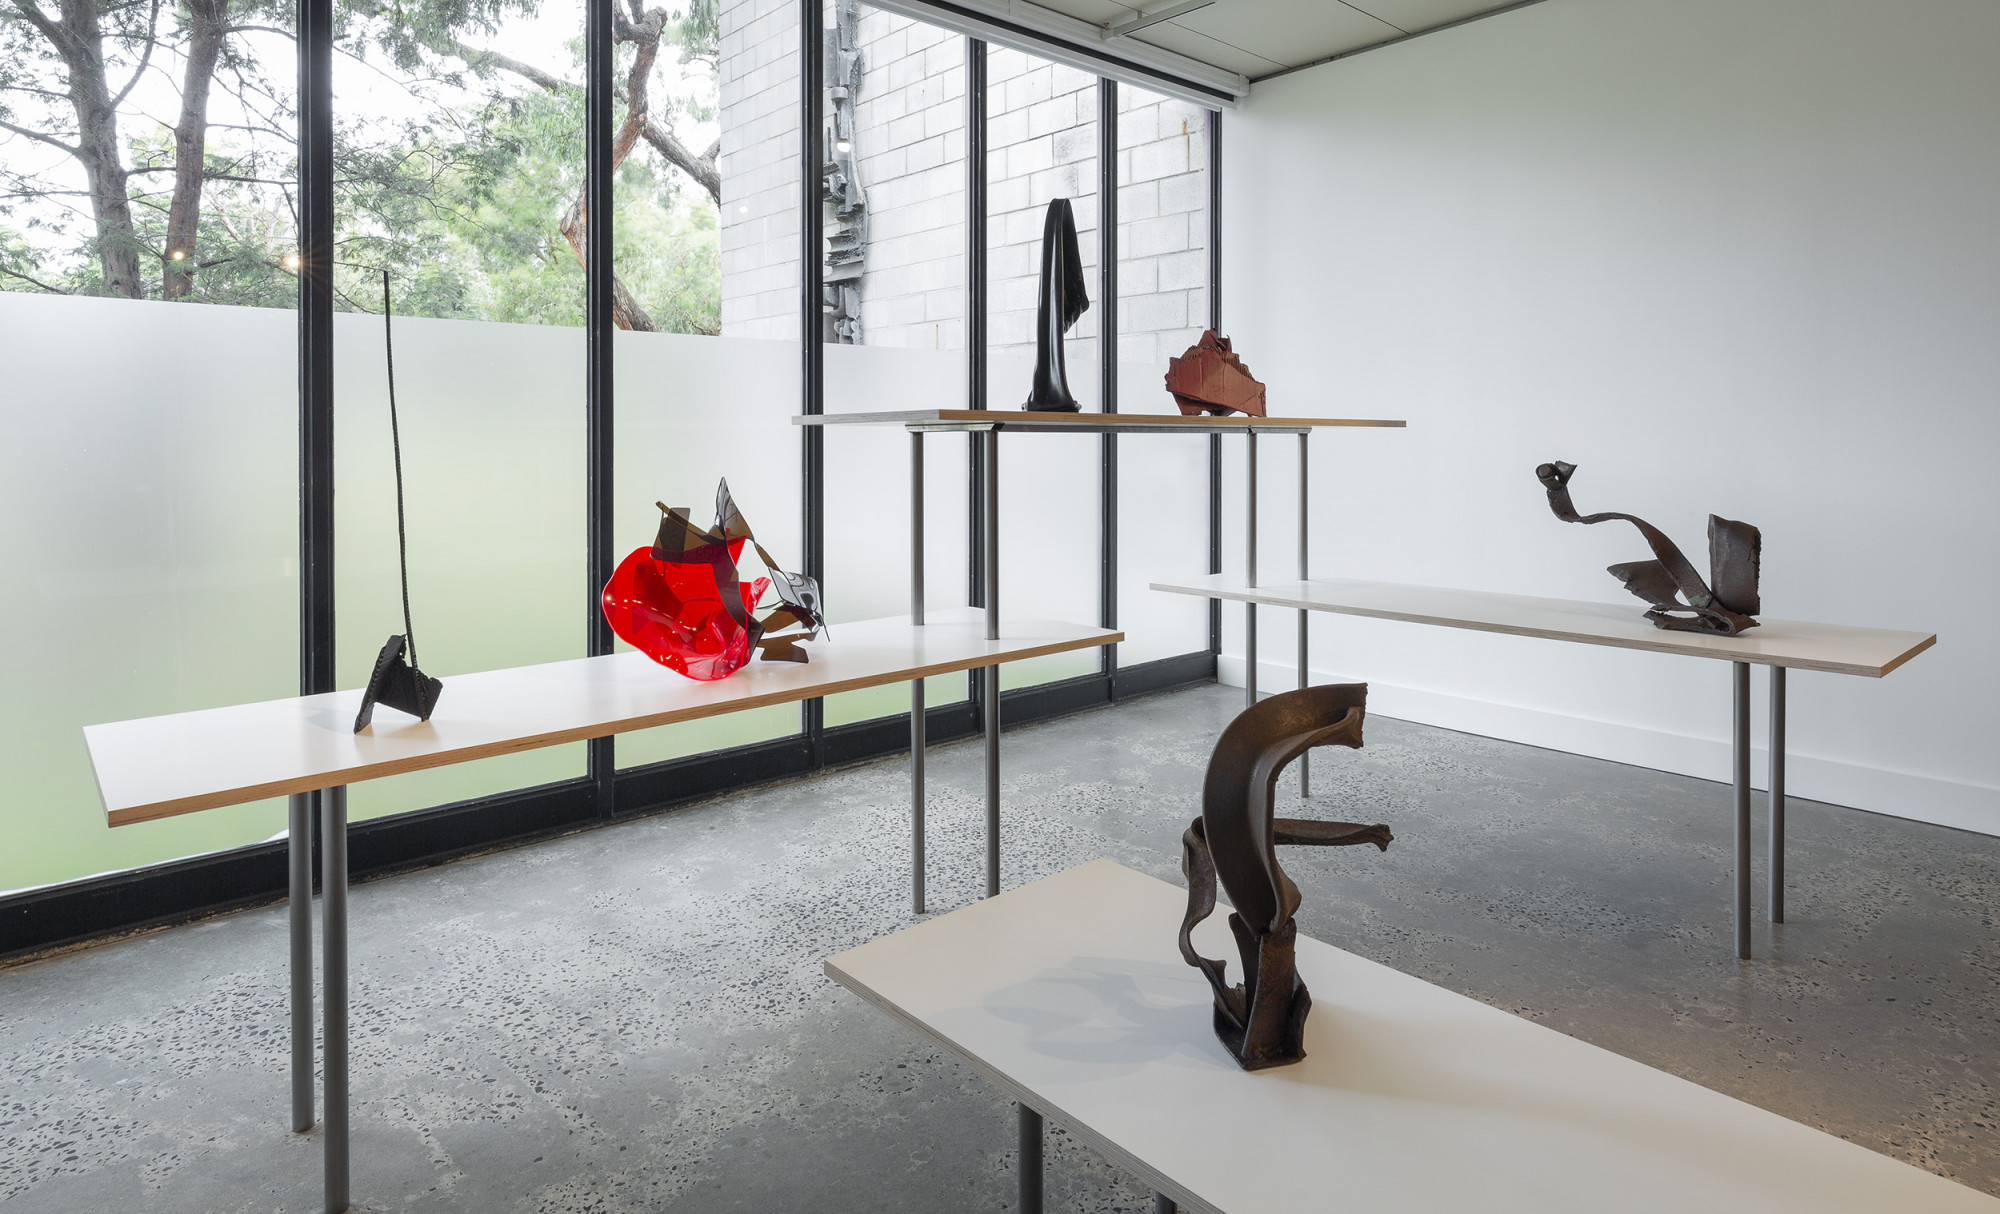 Installation view of Erwin Fabian and Anne-Marie May, <em>Inside Out: Space and Process</em>, 2020, Courtesy McClelland Sculpture Park + Gallery. Photo: Christian Capurro